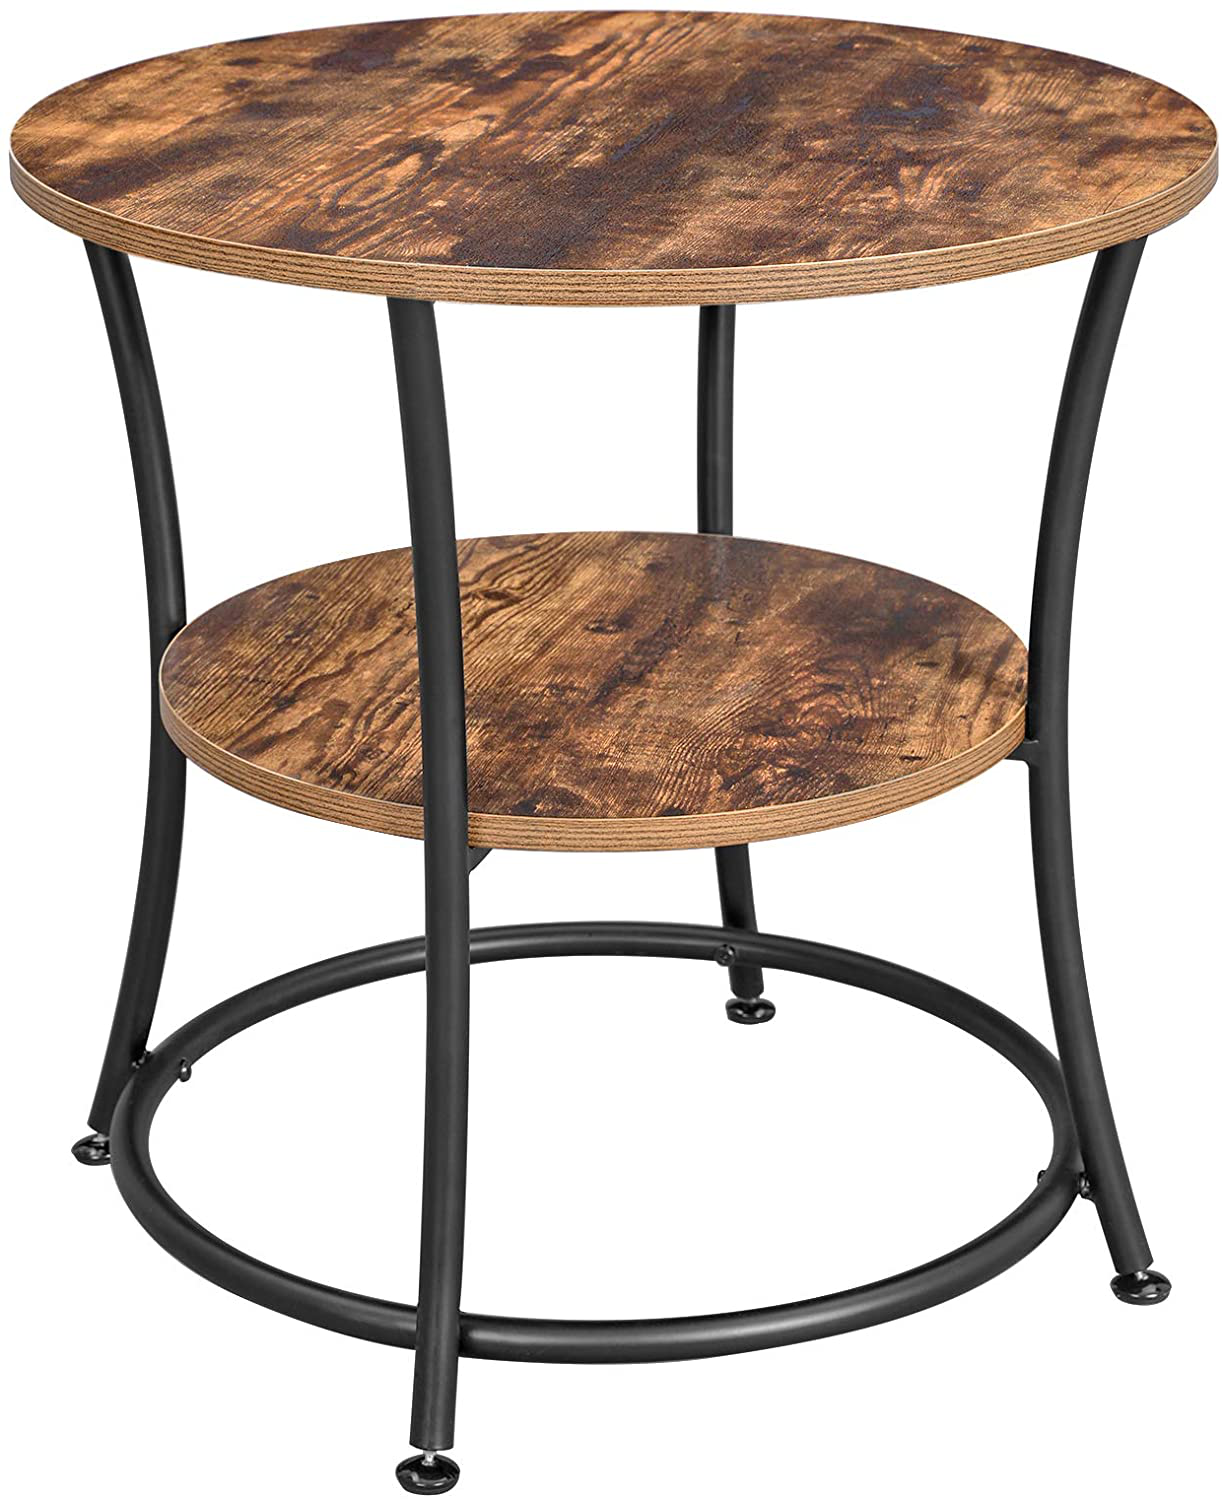 Rena Side Table Round, End Table with 2 Shelves,